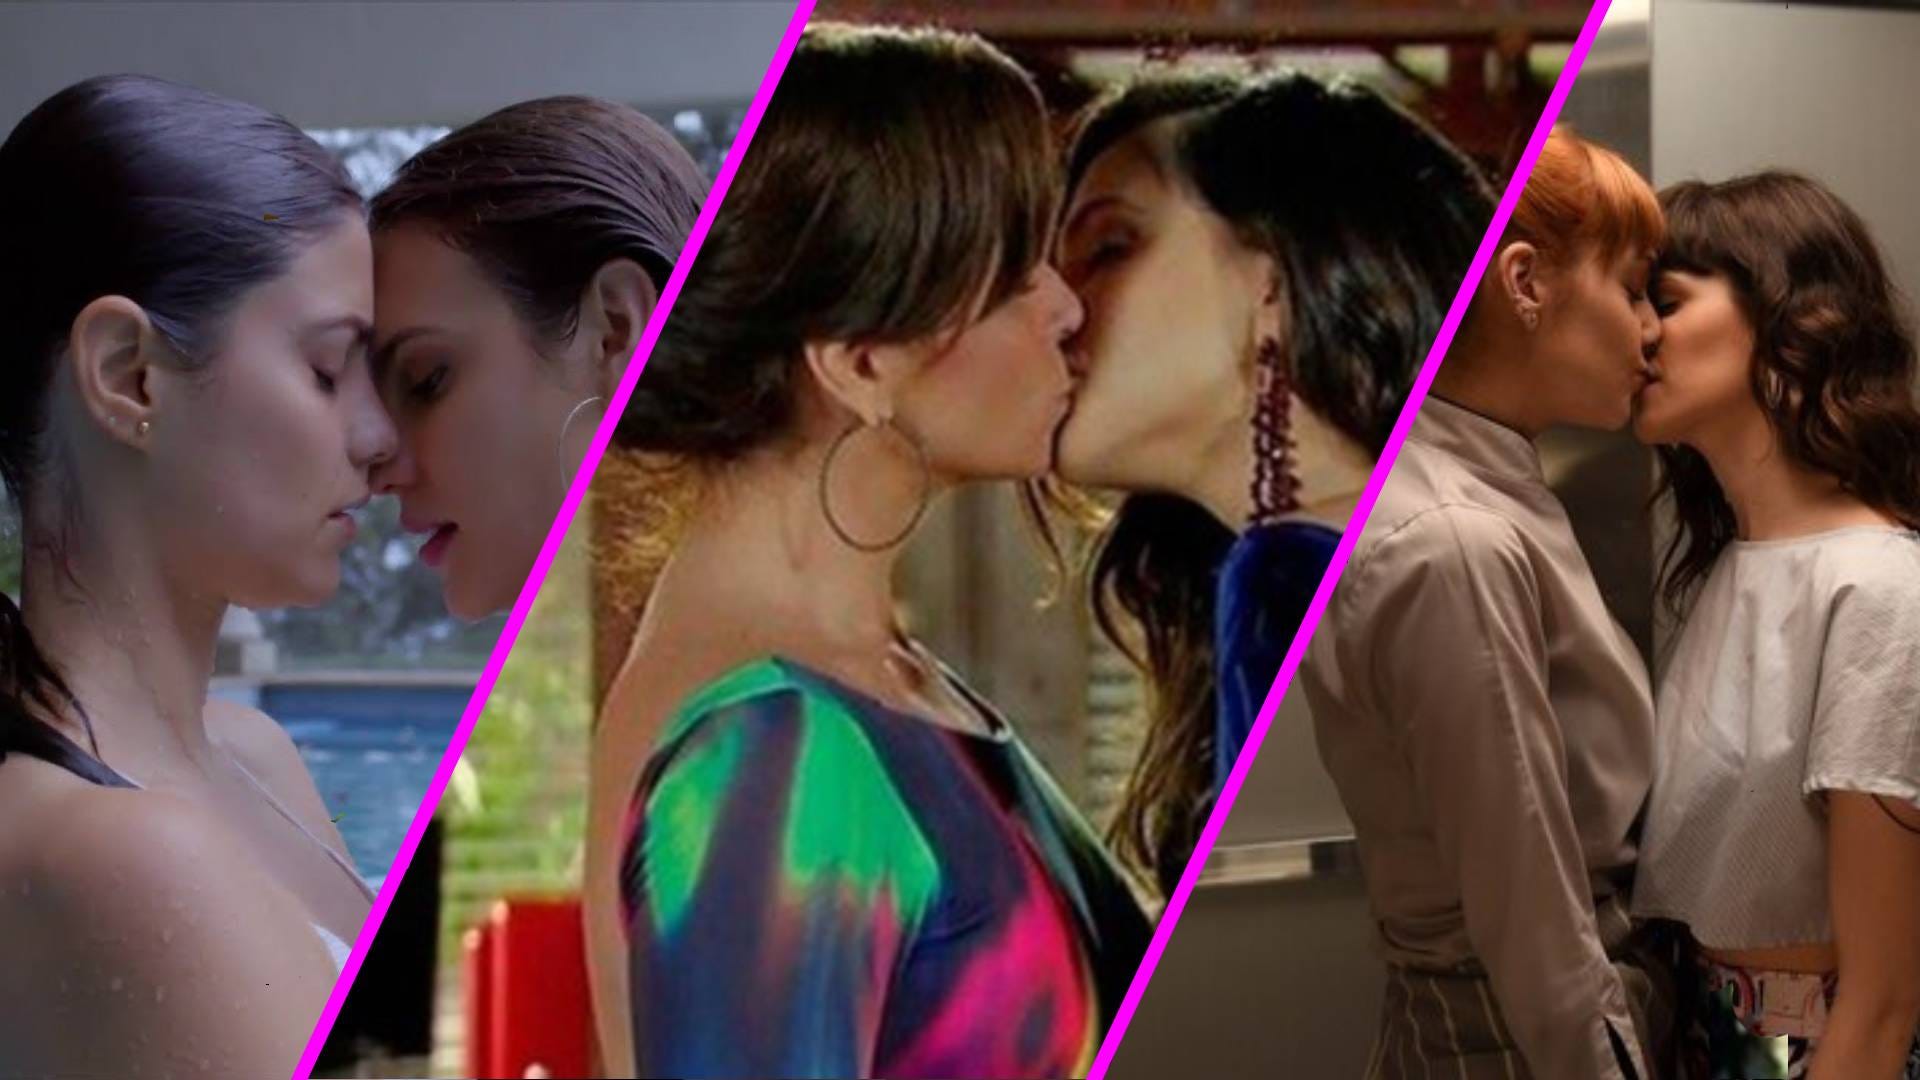 The Soap Opera Lesbians Who Changed The World picture